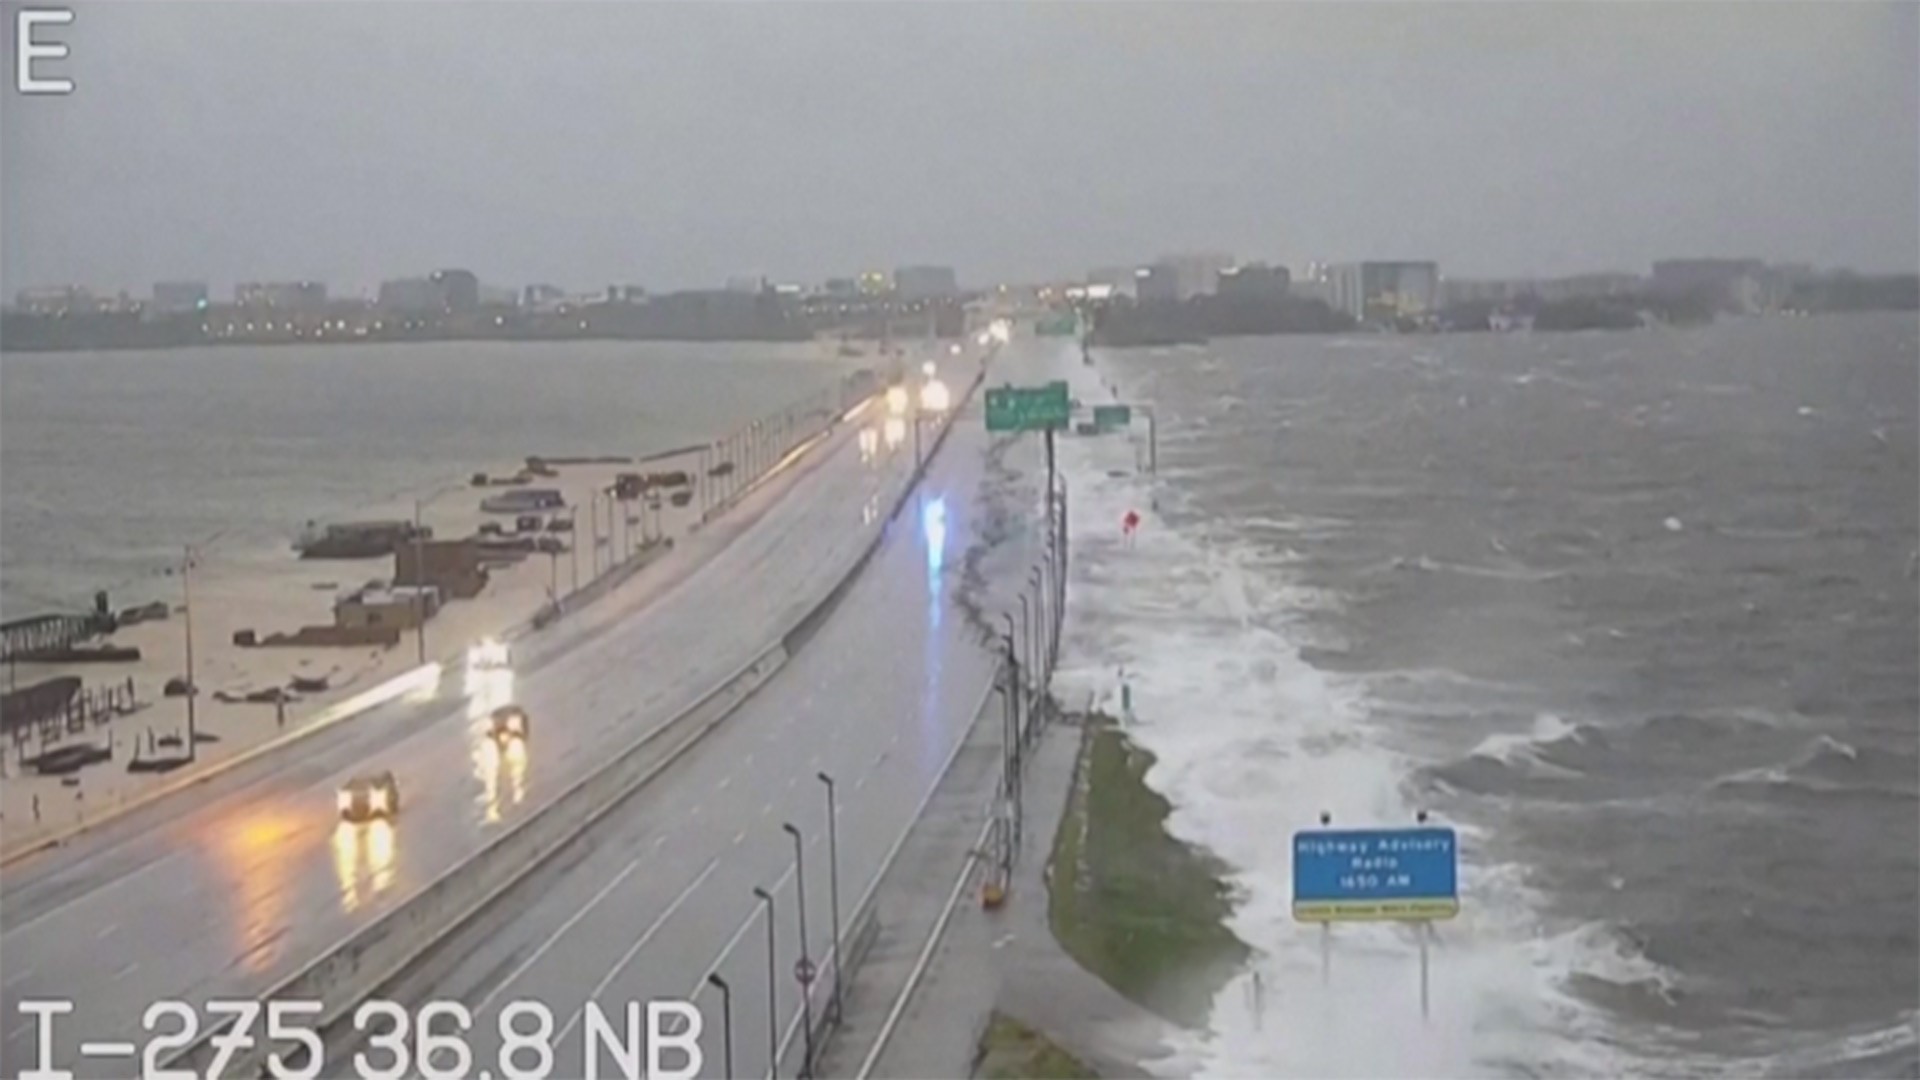 This is video of the Howard Frankland Bridge, which connects Tampa and St. Petersburg.